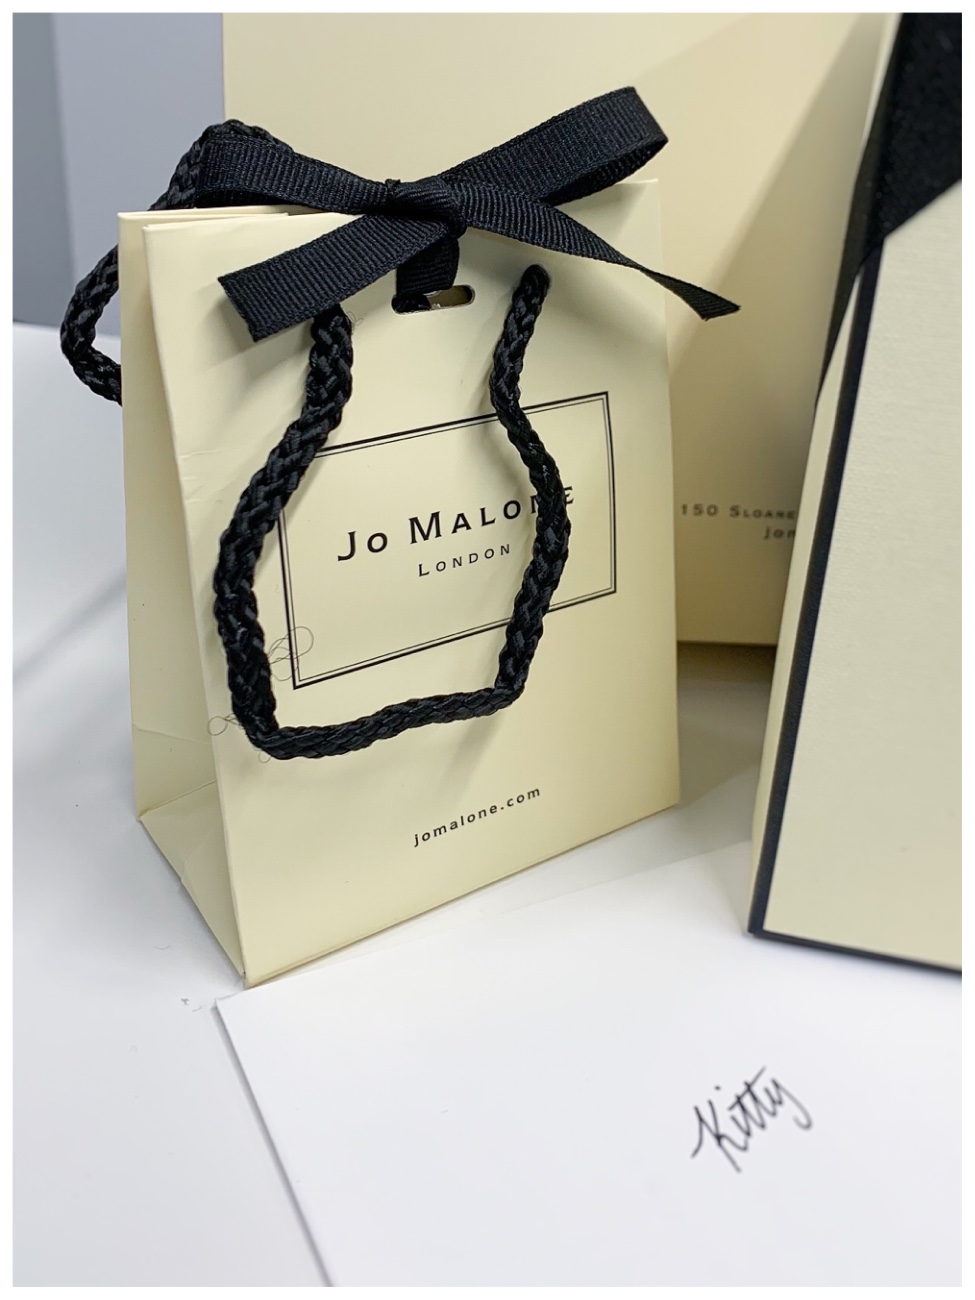 Jo Malone Night Collection Pillow Mist